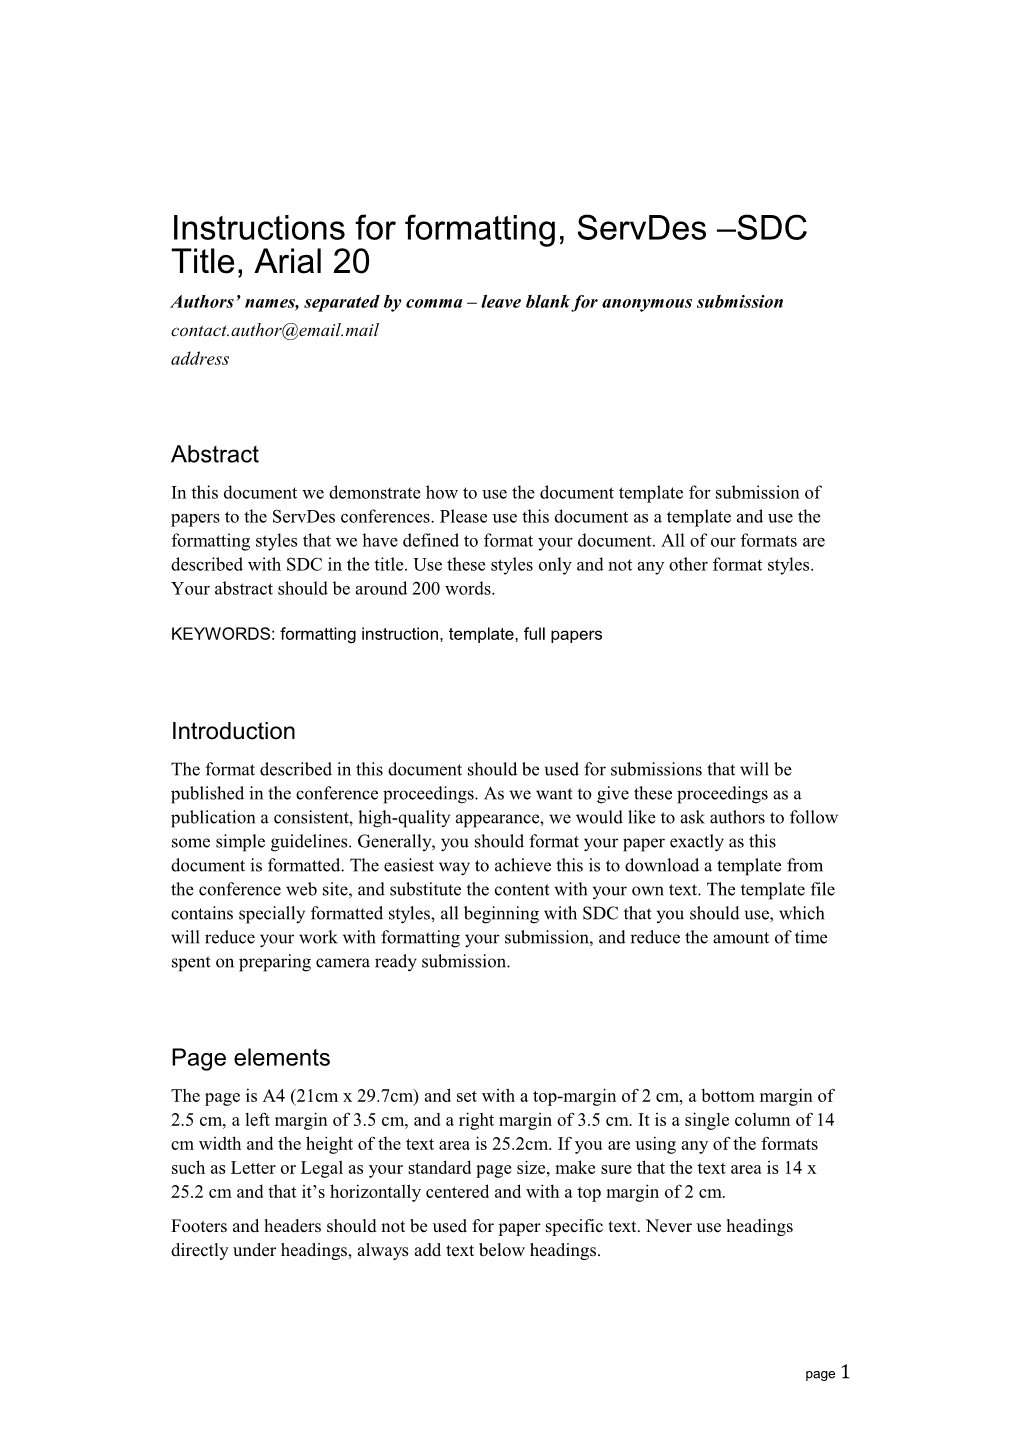 Instructions for Formatting, Servdes SDC Title, Arial 20